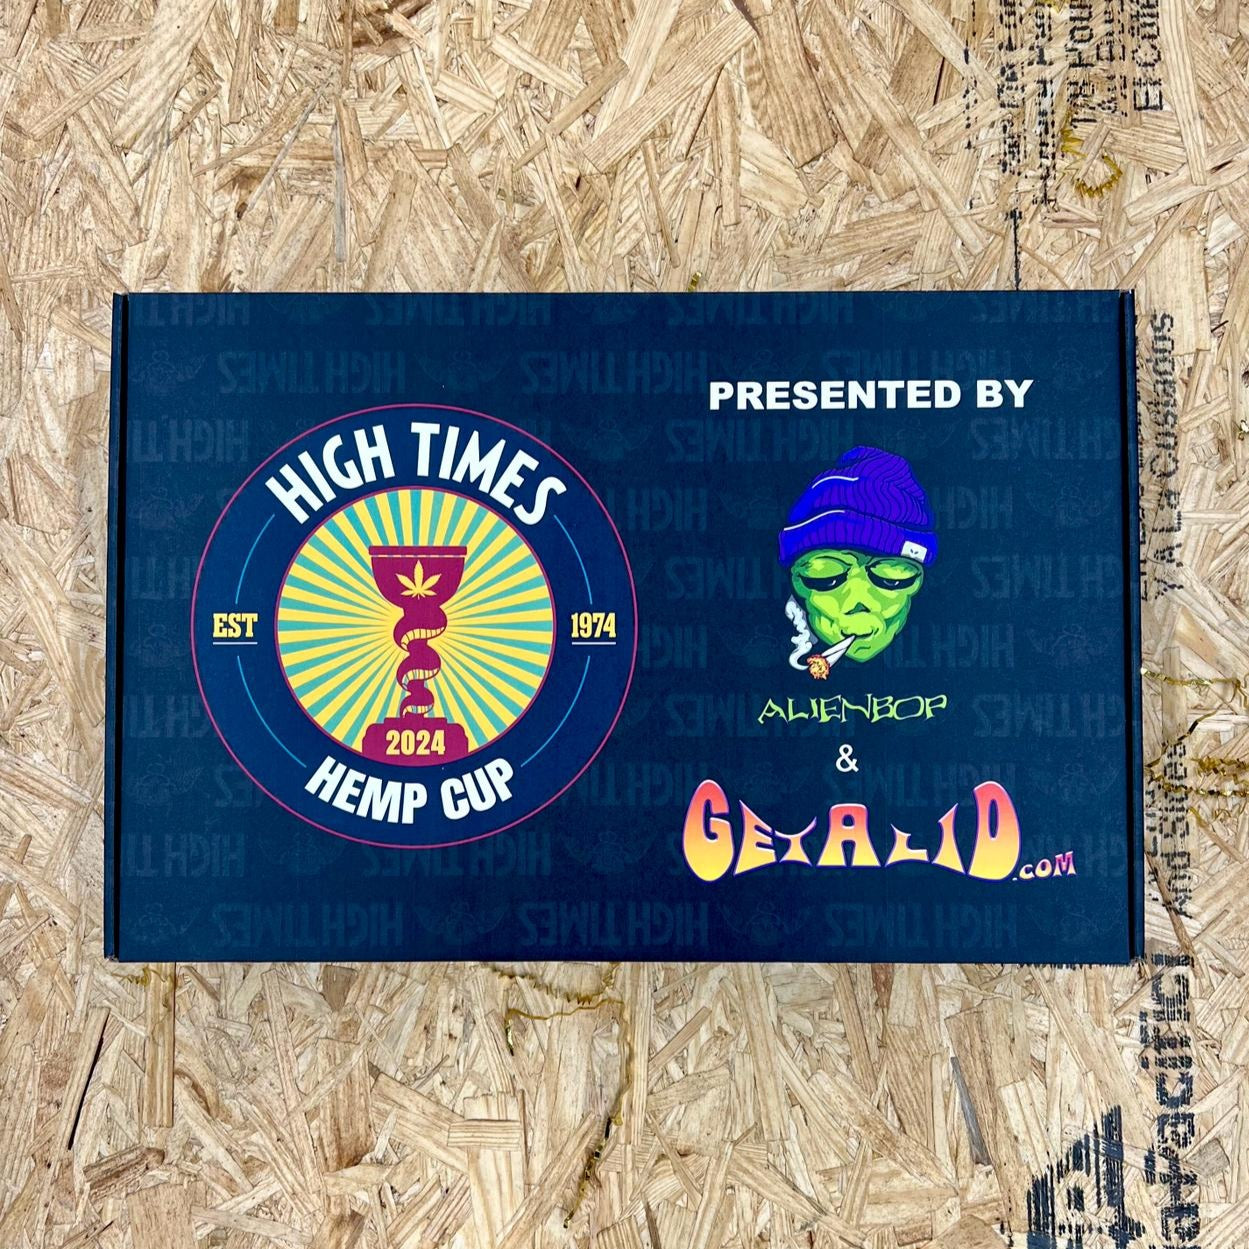 Non-Psychoactive Hemp Cup - Tinctures & Capsules - Official Judge Box (14 items)